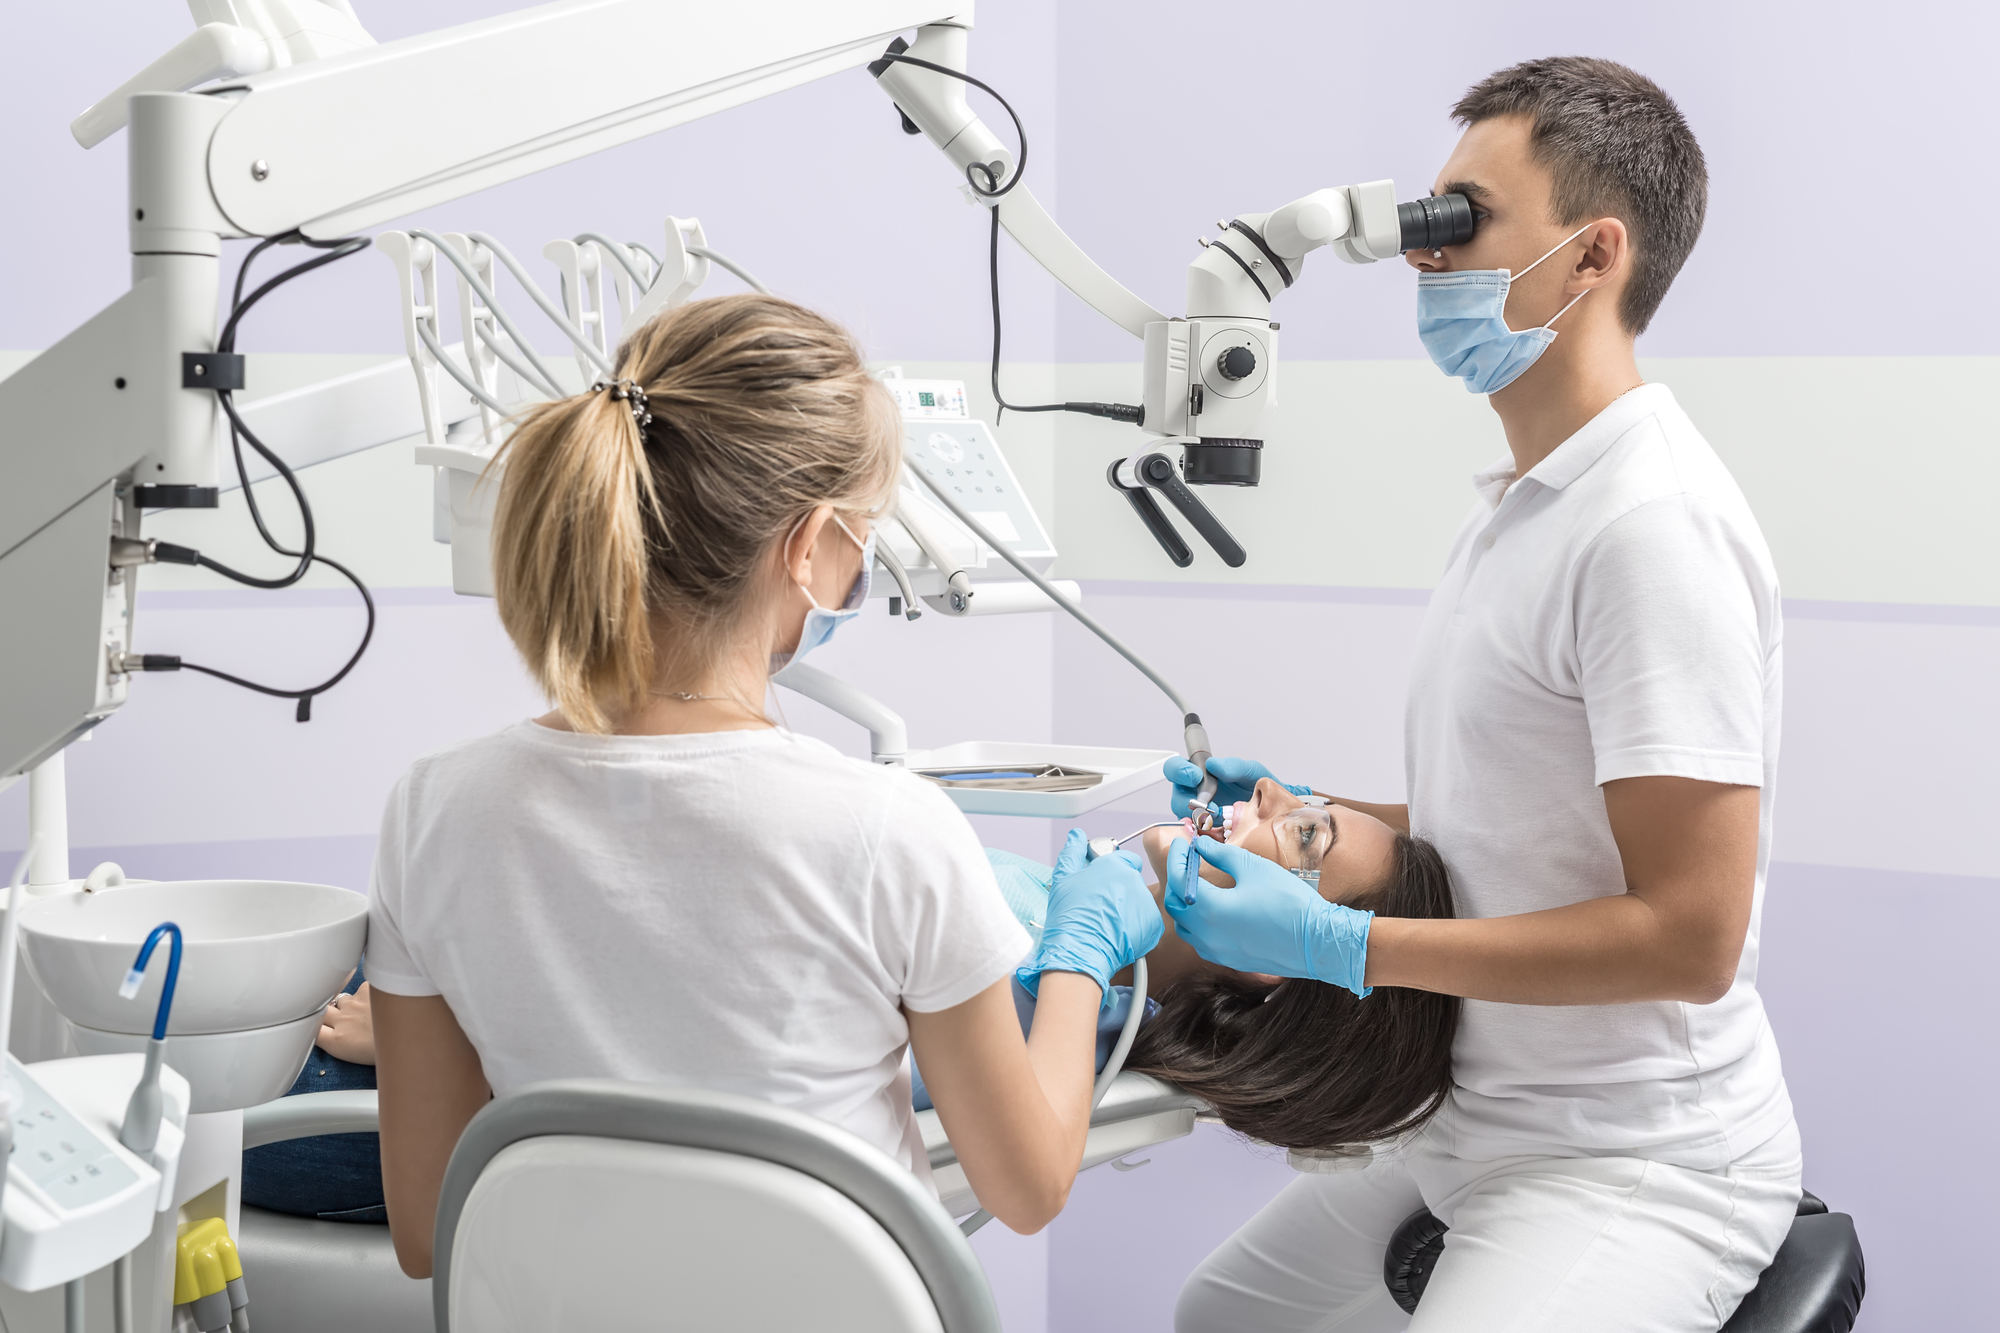 Woman in goggles on a dental chair and a dentist with assistant who sit next to her. Man looks on her teeth using a dental microscope and holds dental instruments. Blonde holds an air water syringe.